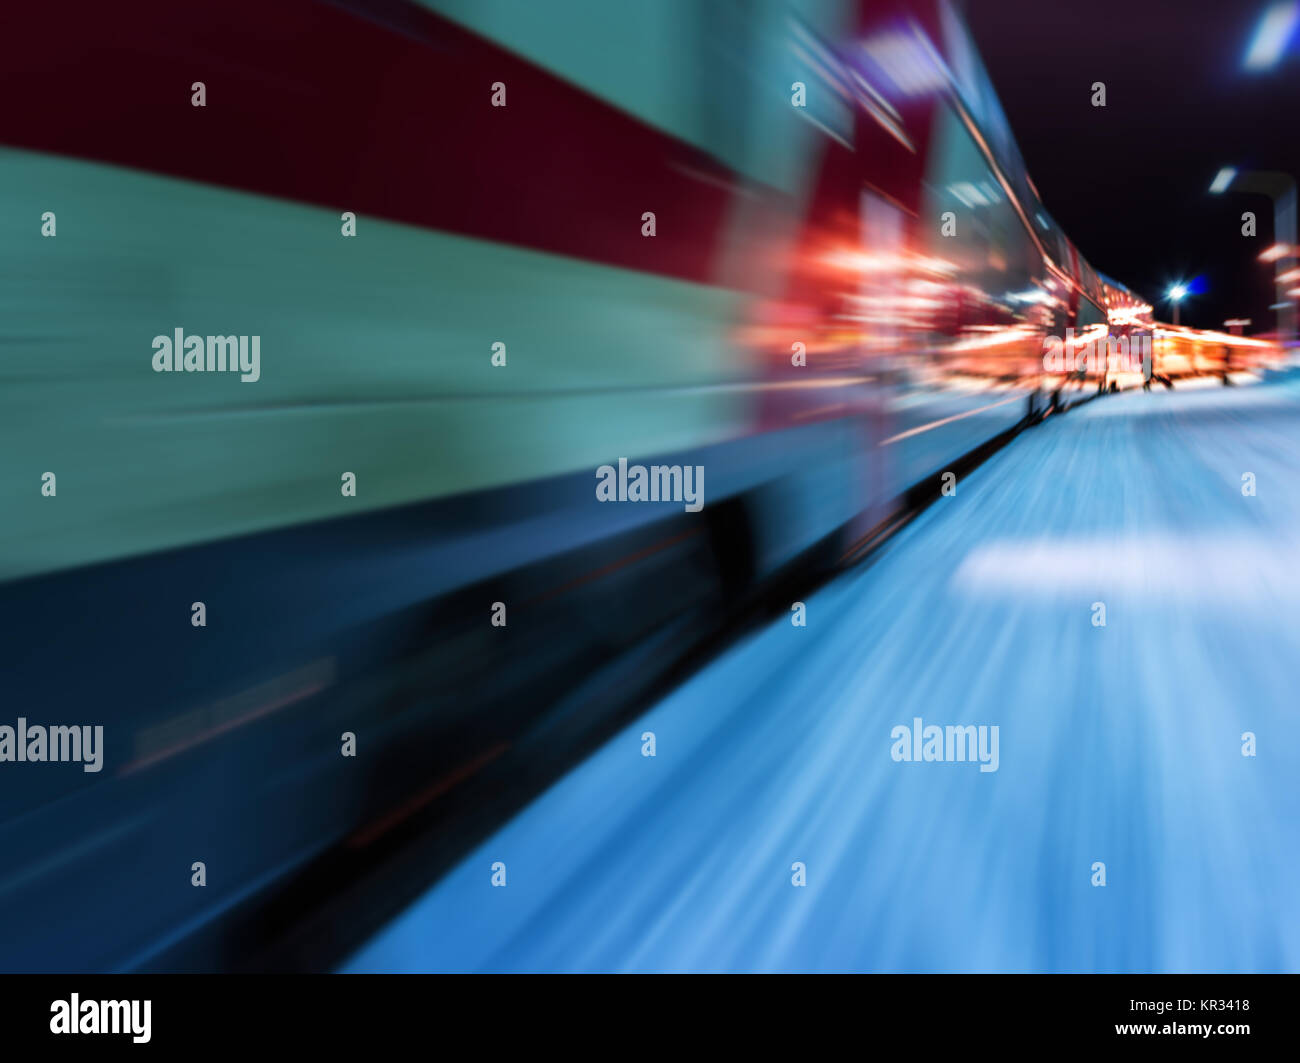 Train in motion abstraction Stock Photo